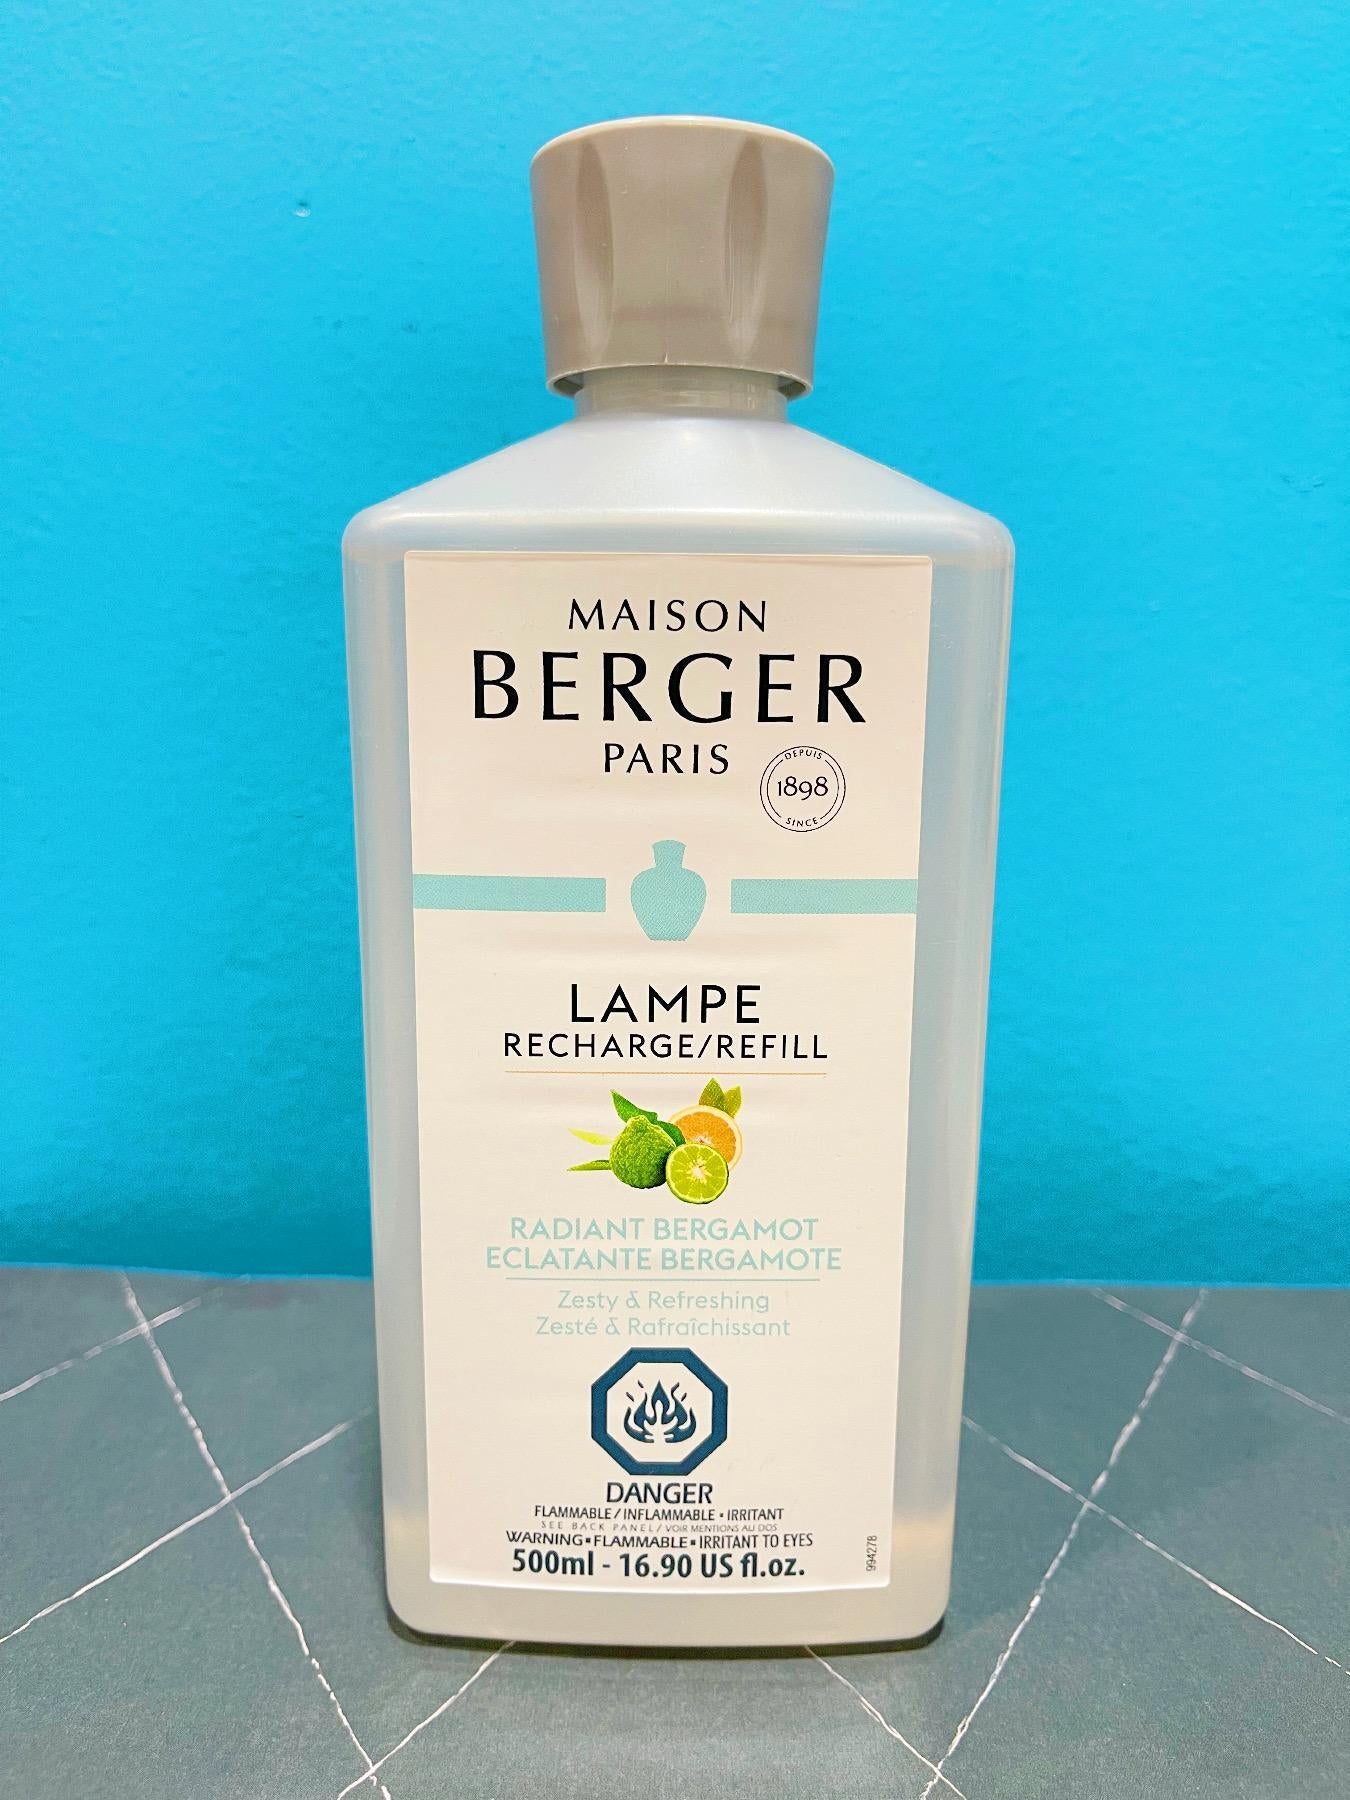 MAISON BERGER - Aroma Respire Lampe Berger Fragrance Refill for Home  Fragrance Oil Diffuser - 16.9 Fluid Ounces - 500 milliliters